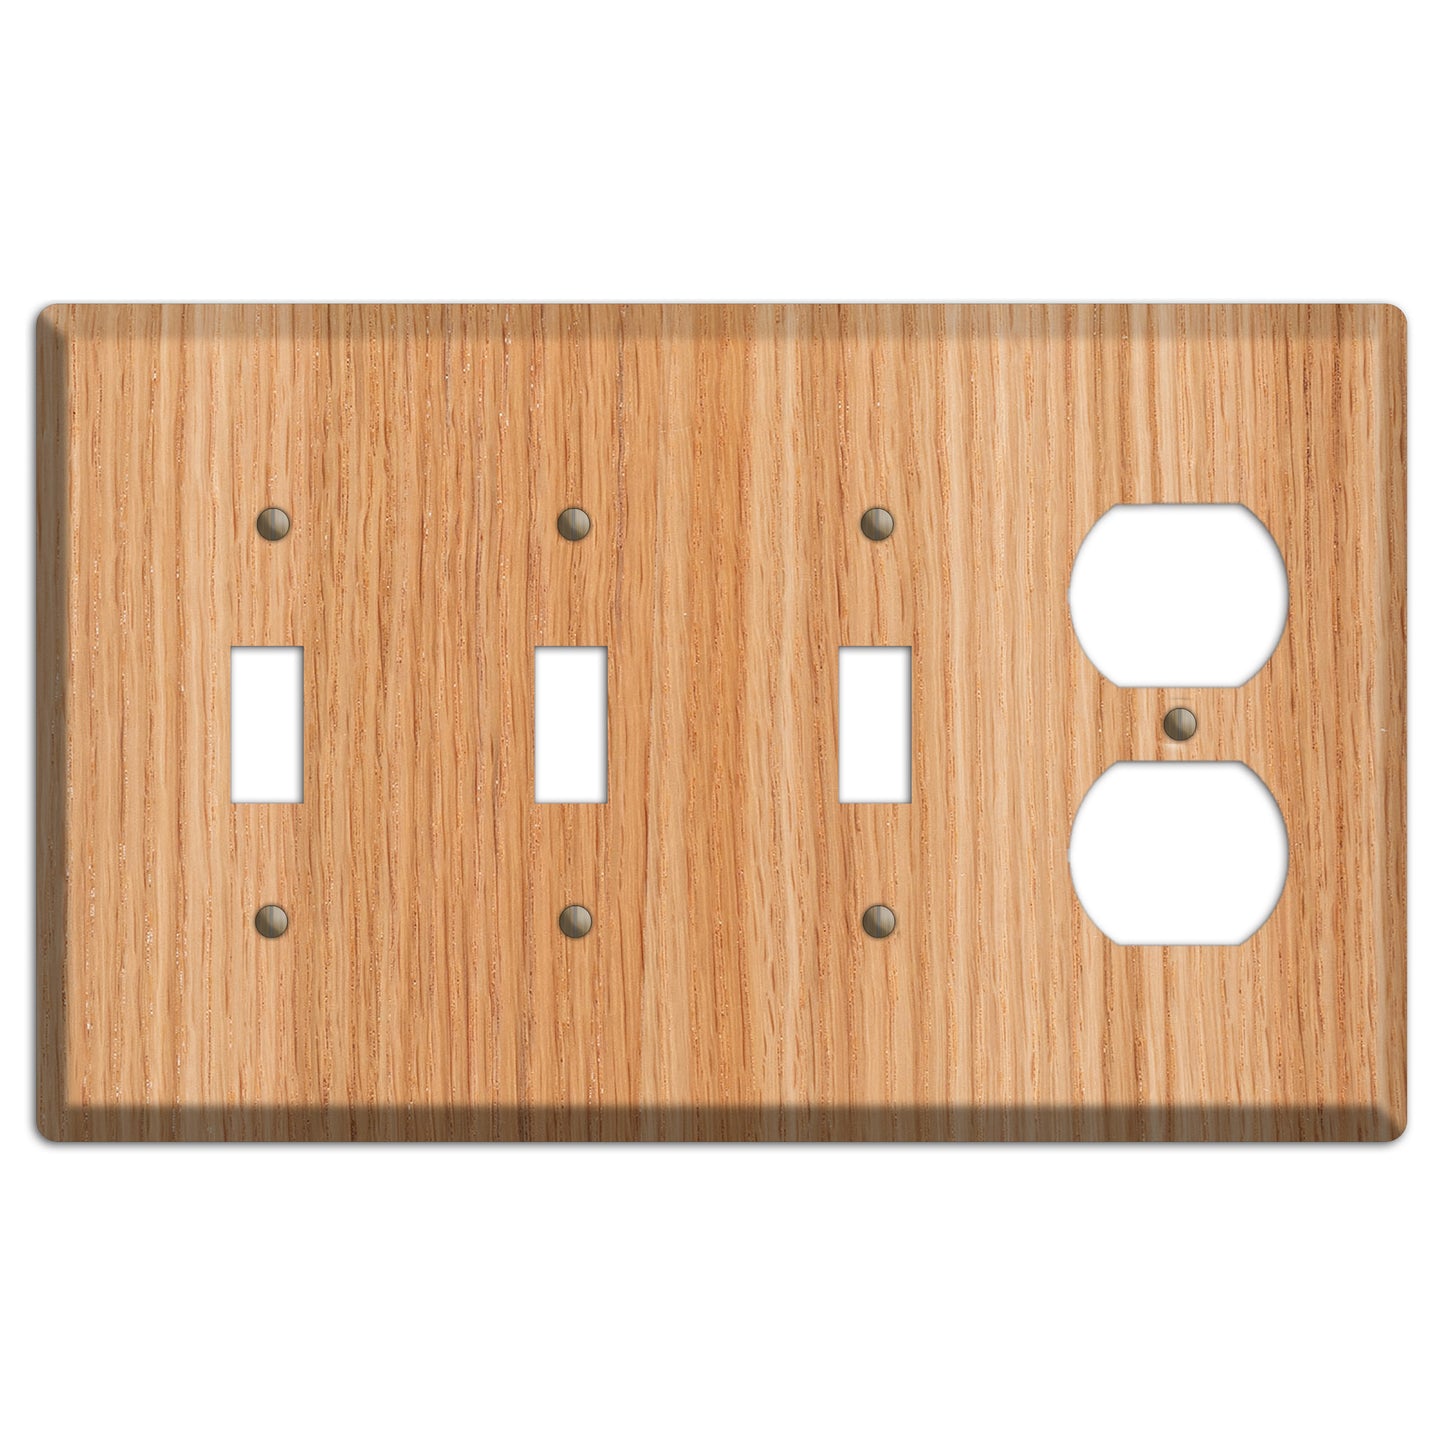 Unfinished Red Oak Wood 3 Toggle / Duplex Outlet Cover Plate